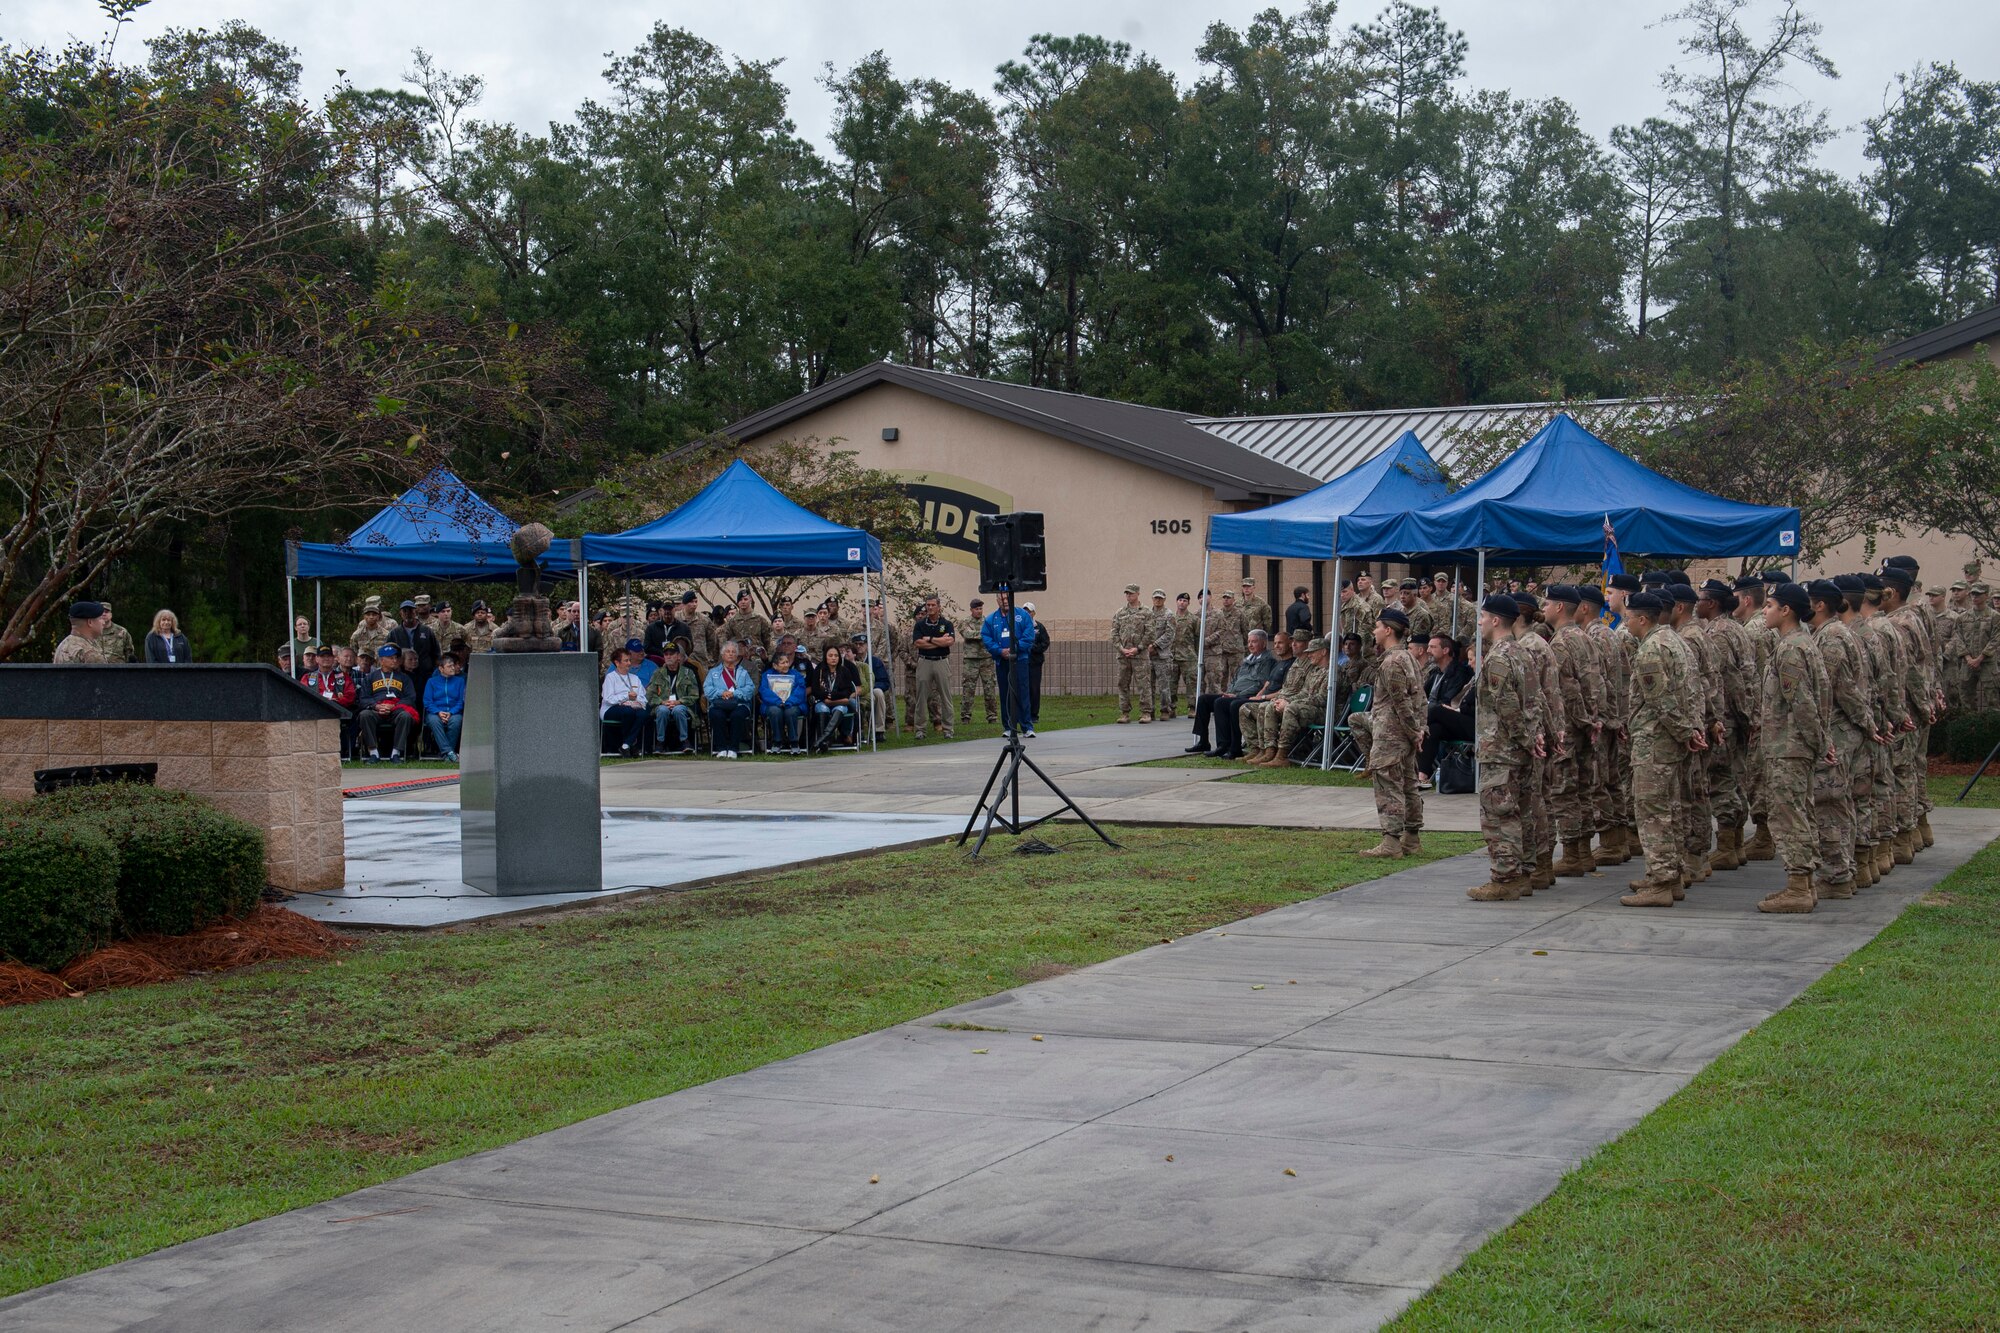 Airmen assigned to the 820th Base Defense Group (BDG) and members of the Safeside Association attend a memorial service Nov. 8, 2019, at Moody Air Force Base, Ga. Safeside members come together every two years to participate in a three-day event to expose new 820th BDG Airmen to their heritage. The reunion consists of a memorial service for fallen Safeside members, current capabilities demonstration and golf tournament. (U.S. Air Force photo by Airman Azaria E. Foster)